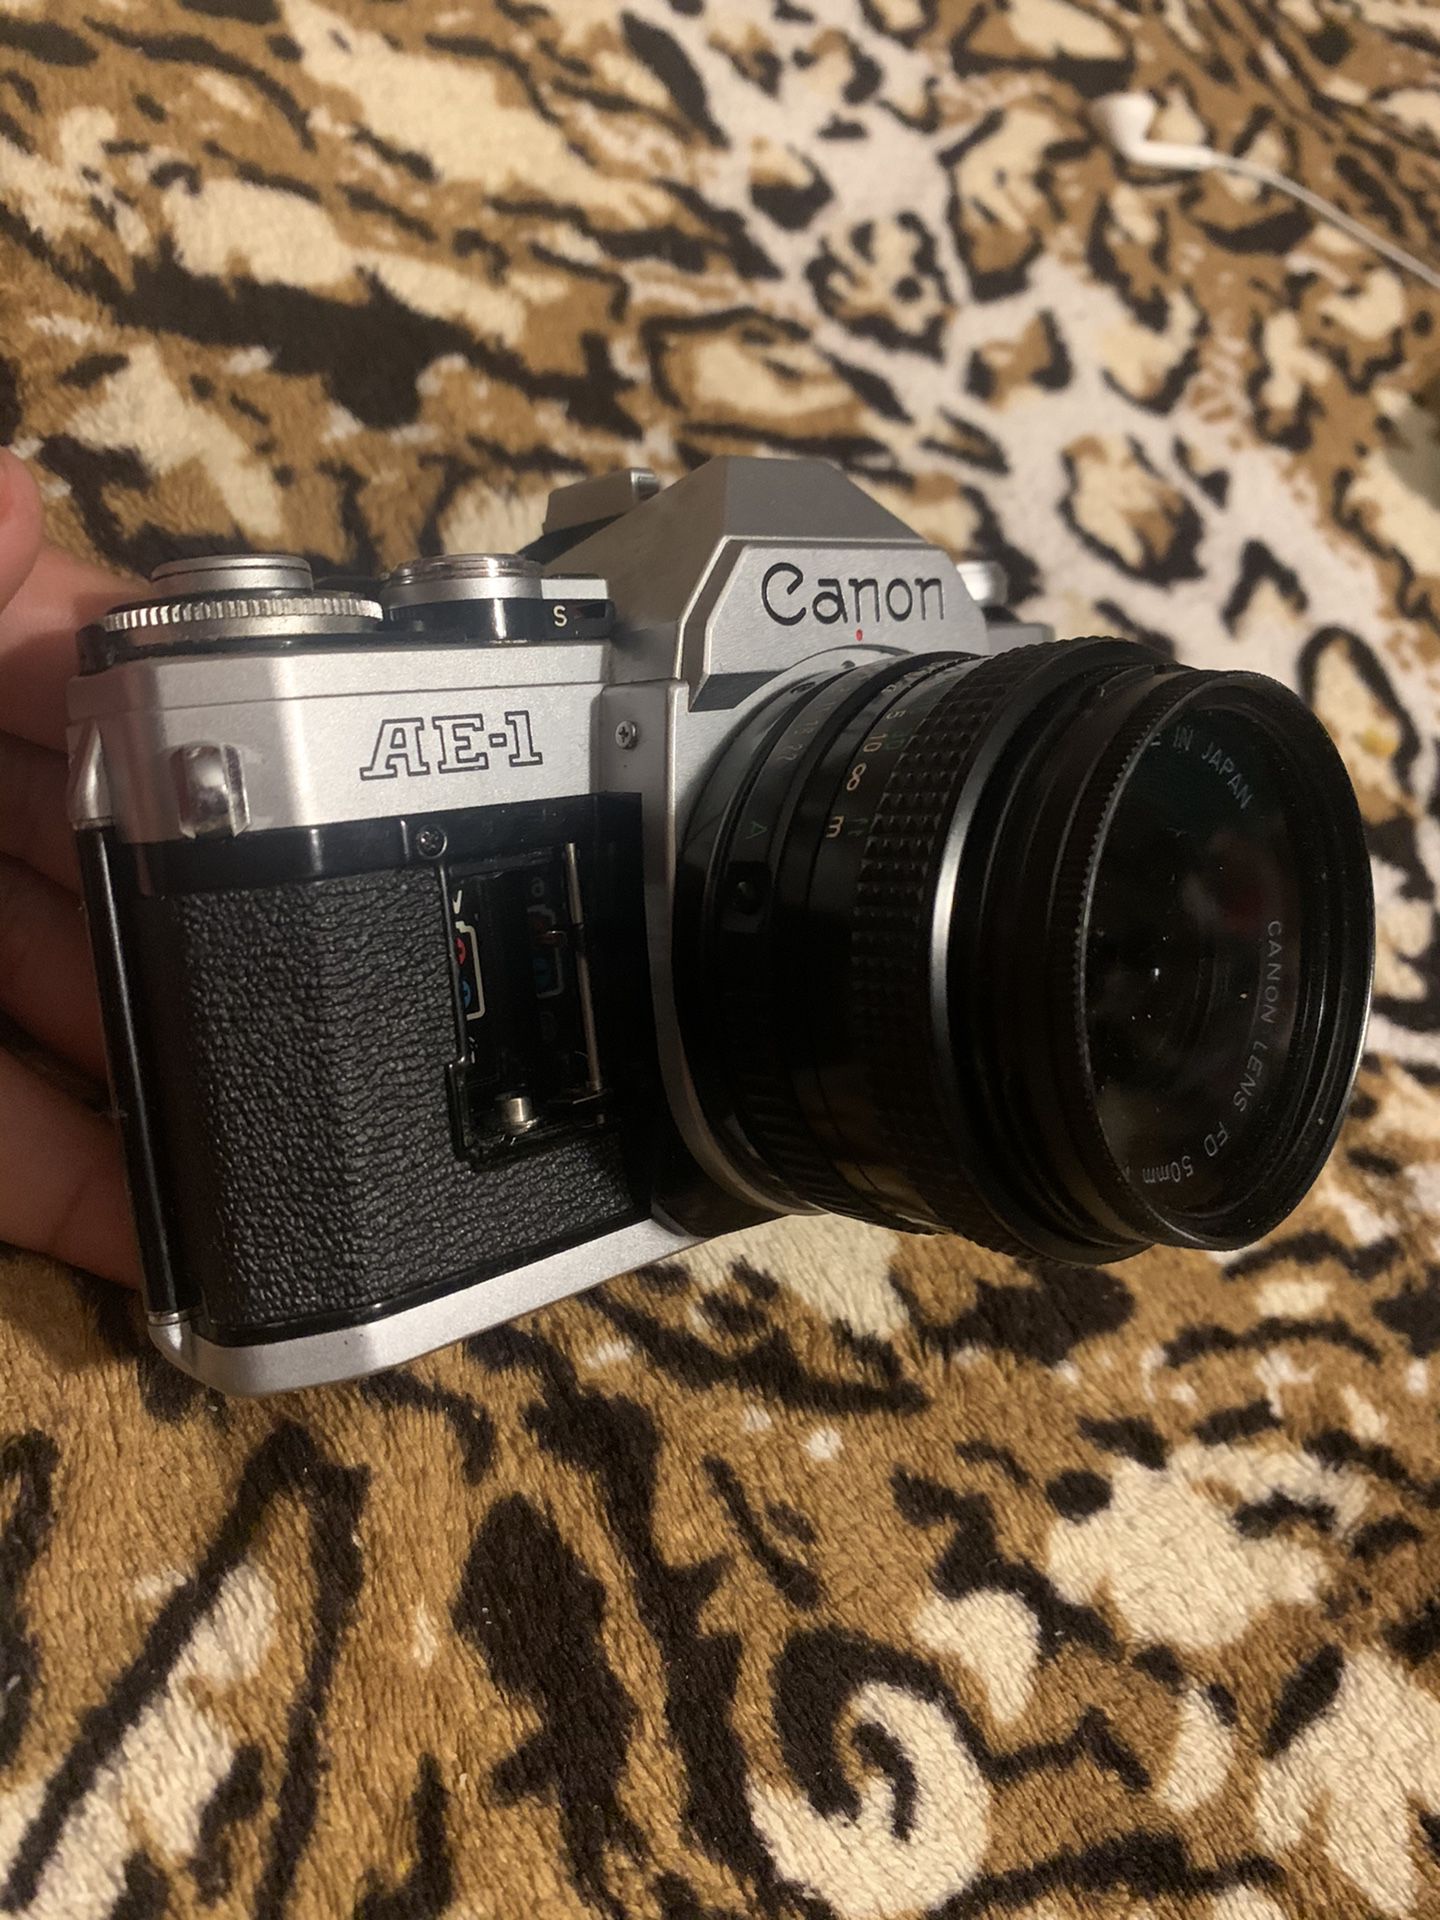 Canon AE-1 with some accessories